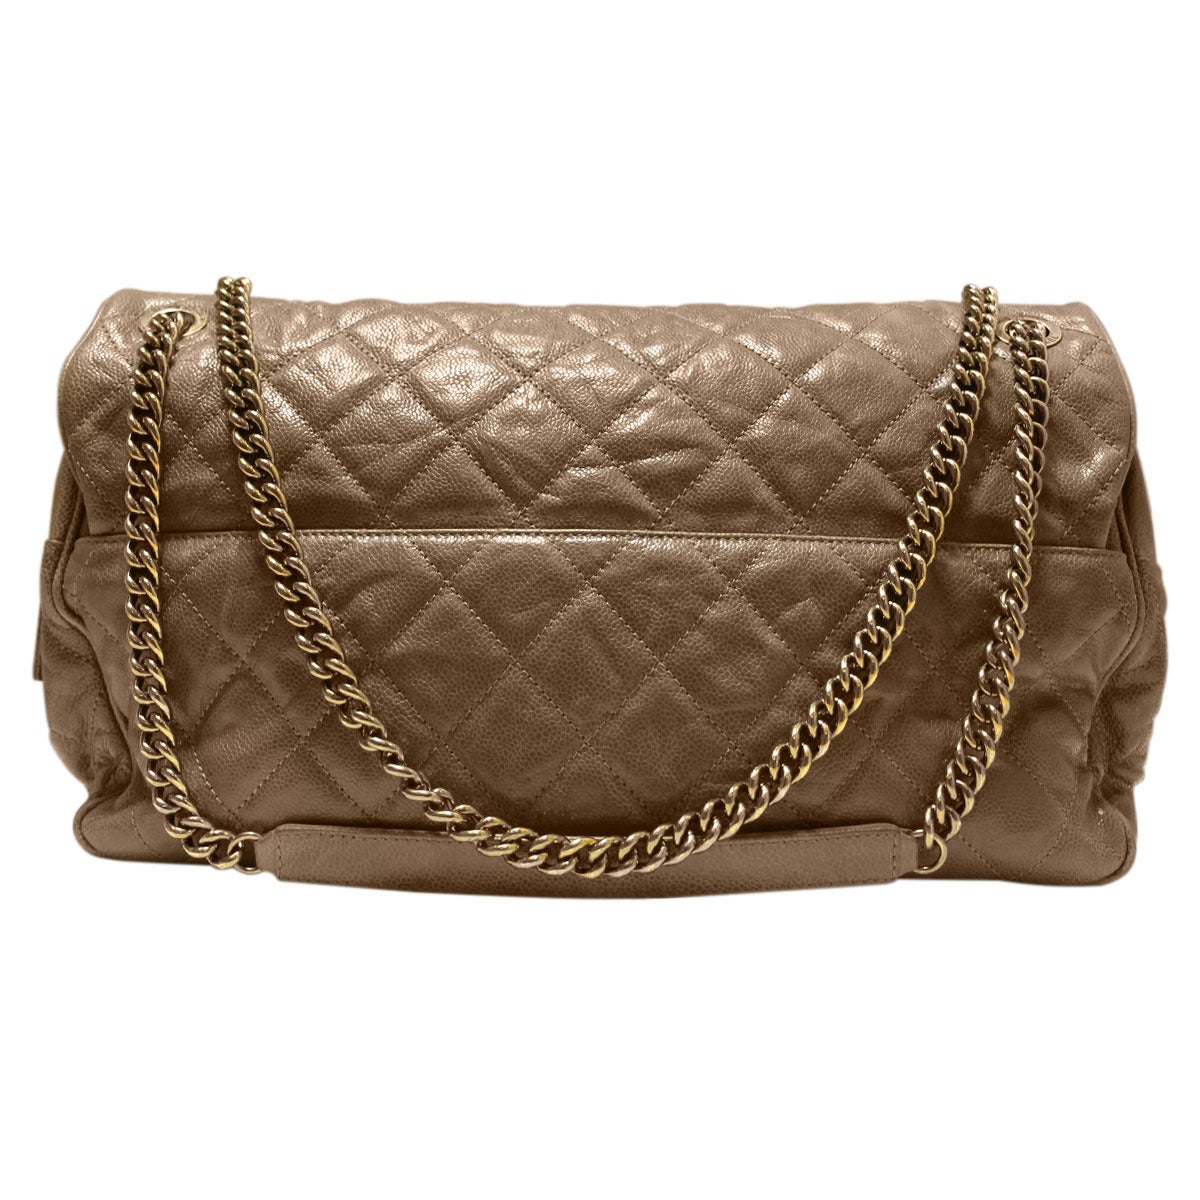 Brand: Chanel
Handles: Gold Tone Chain with Brown Leather Shoulder Rest
Drop at Longest Length: 18